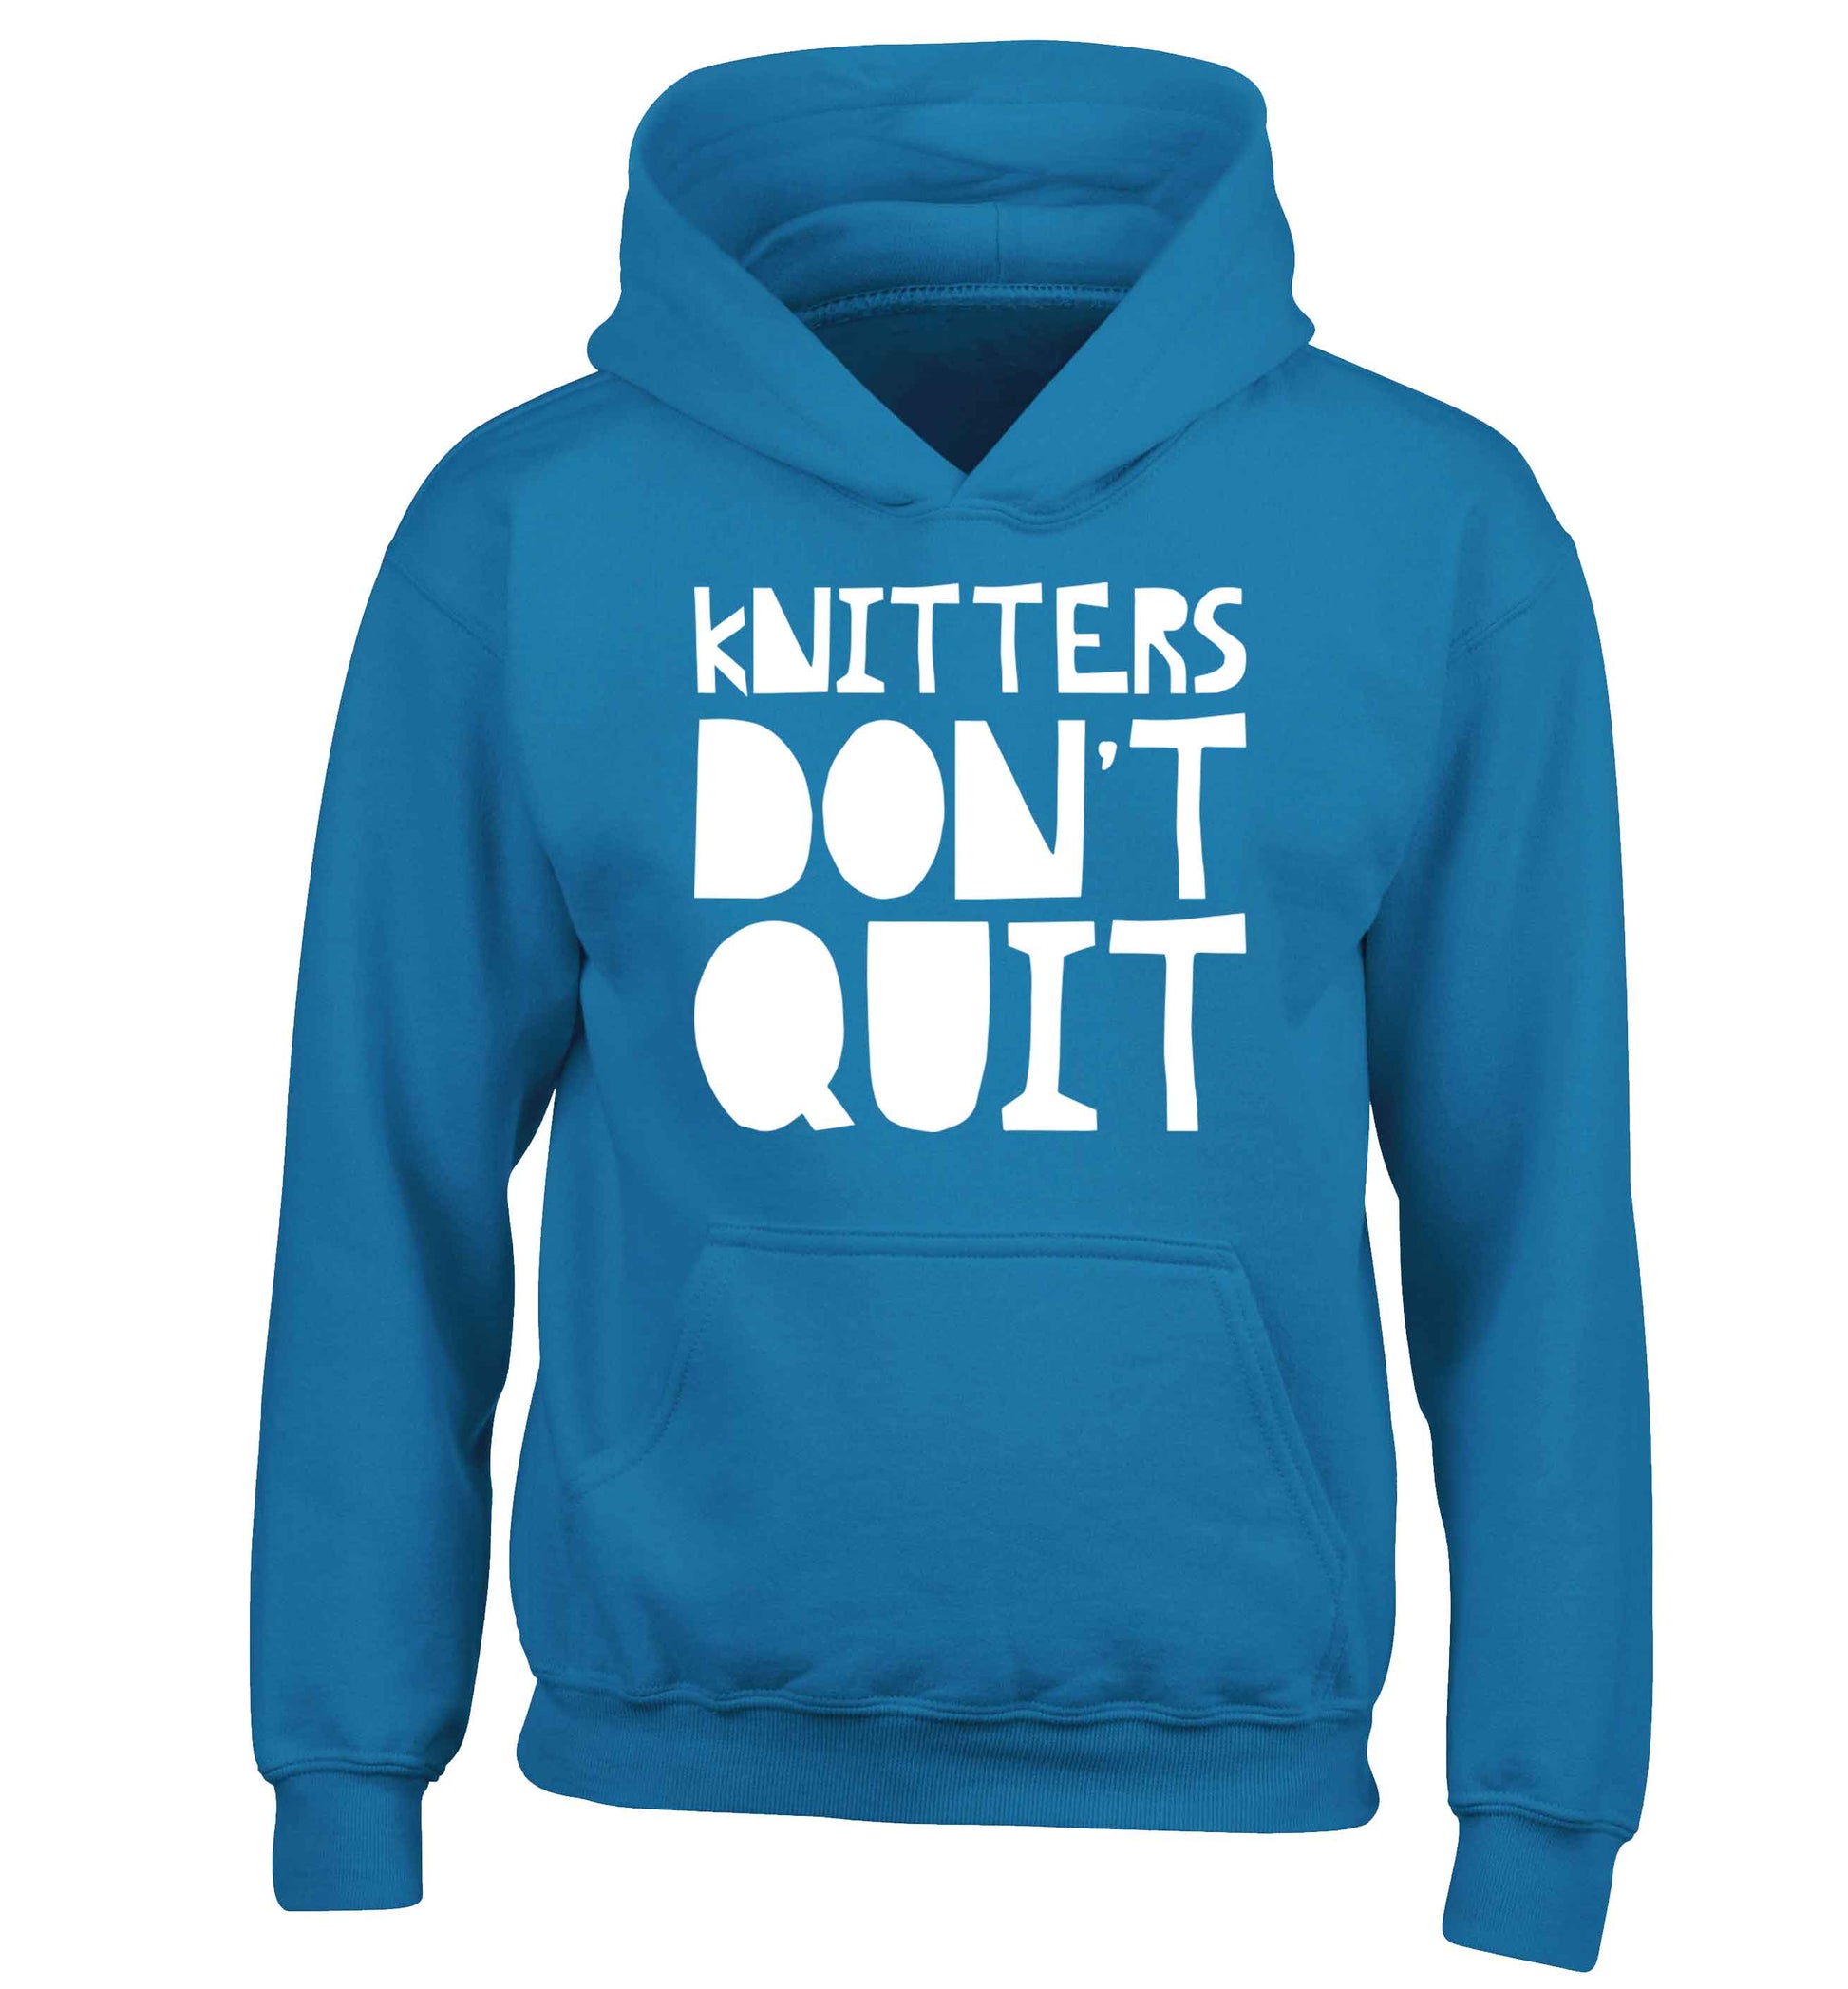 Knitters don't quit children's blue hoodie 12-13 Years